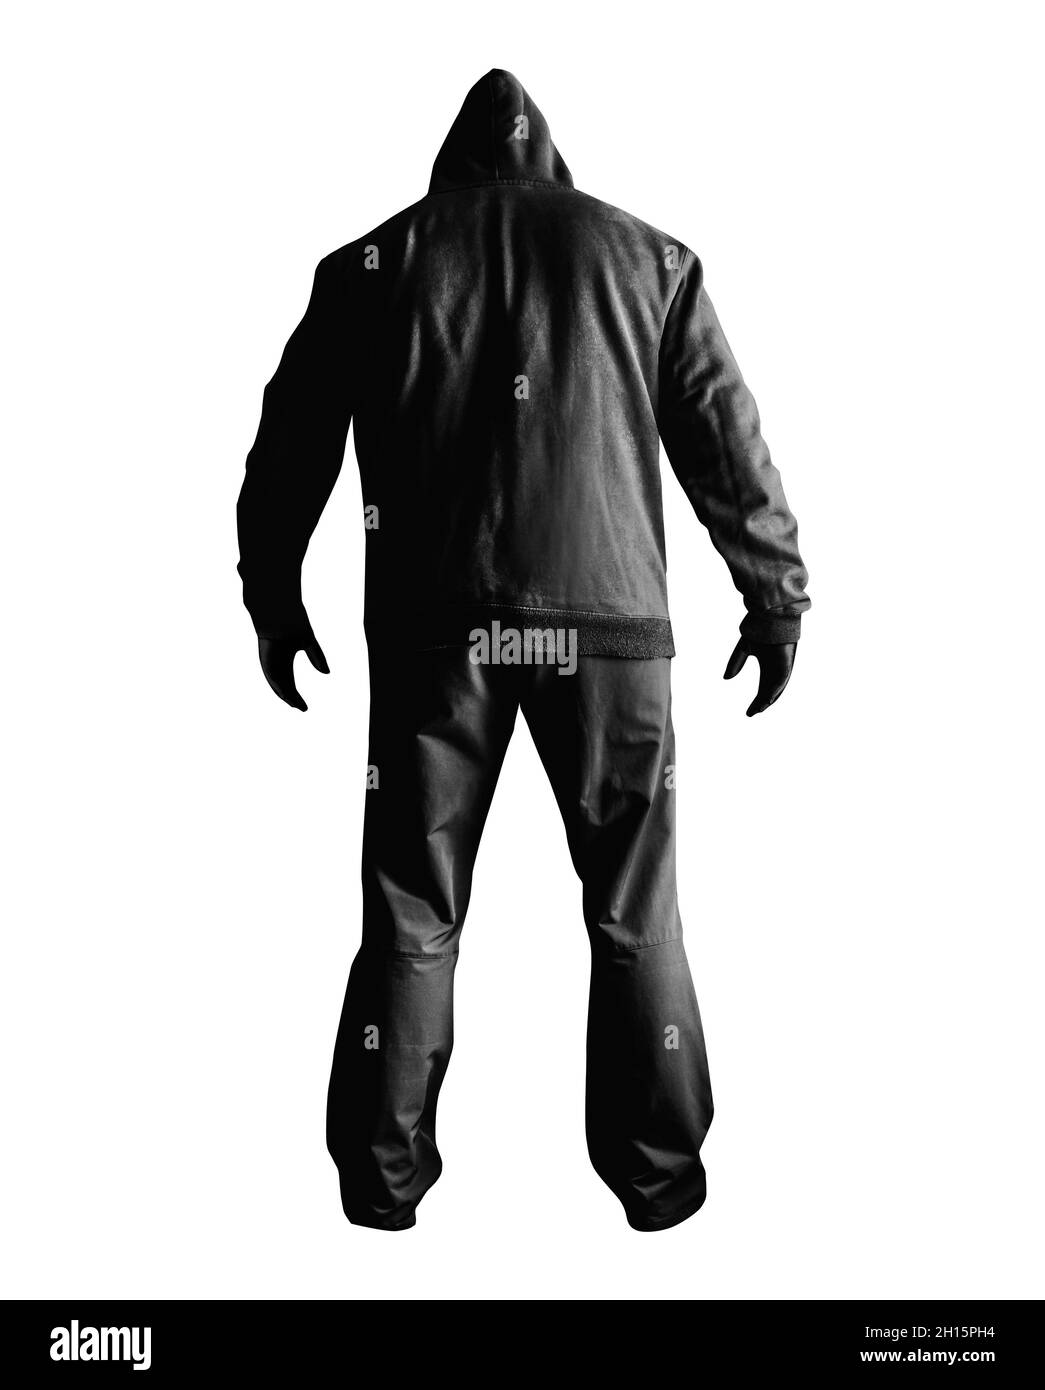 Isolated photo of scary horror stranger stalker man in black hood and clothing standing rear view on white background. Stock Photo